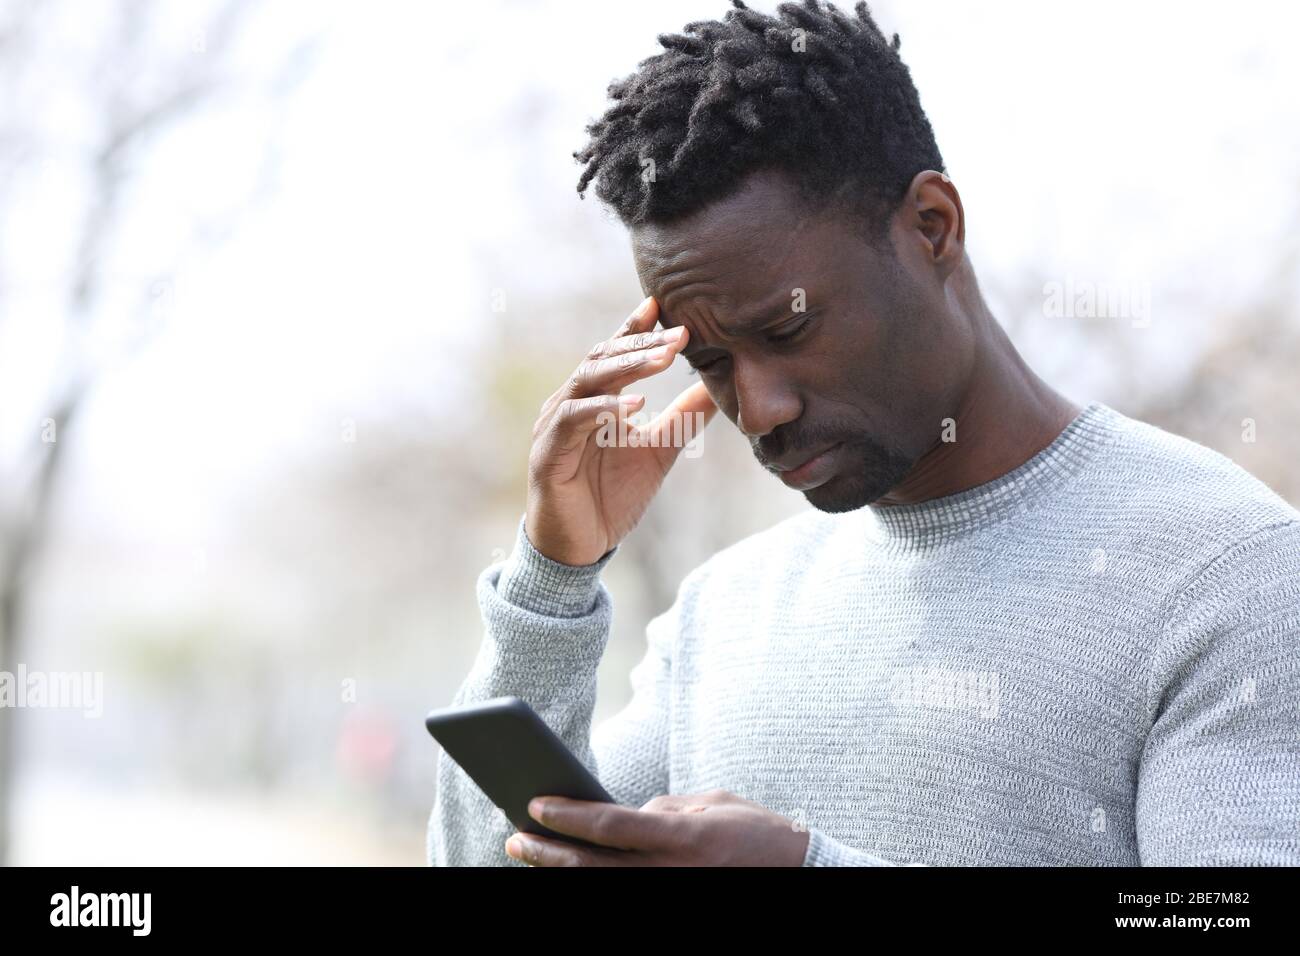 Worried black man reading bad news on smart phone standing at park Stock Photo